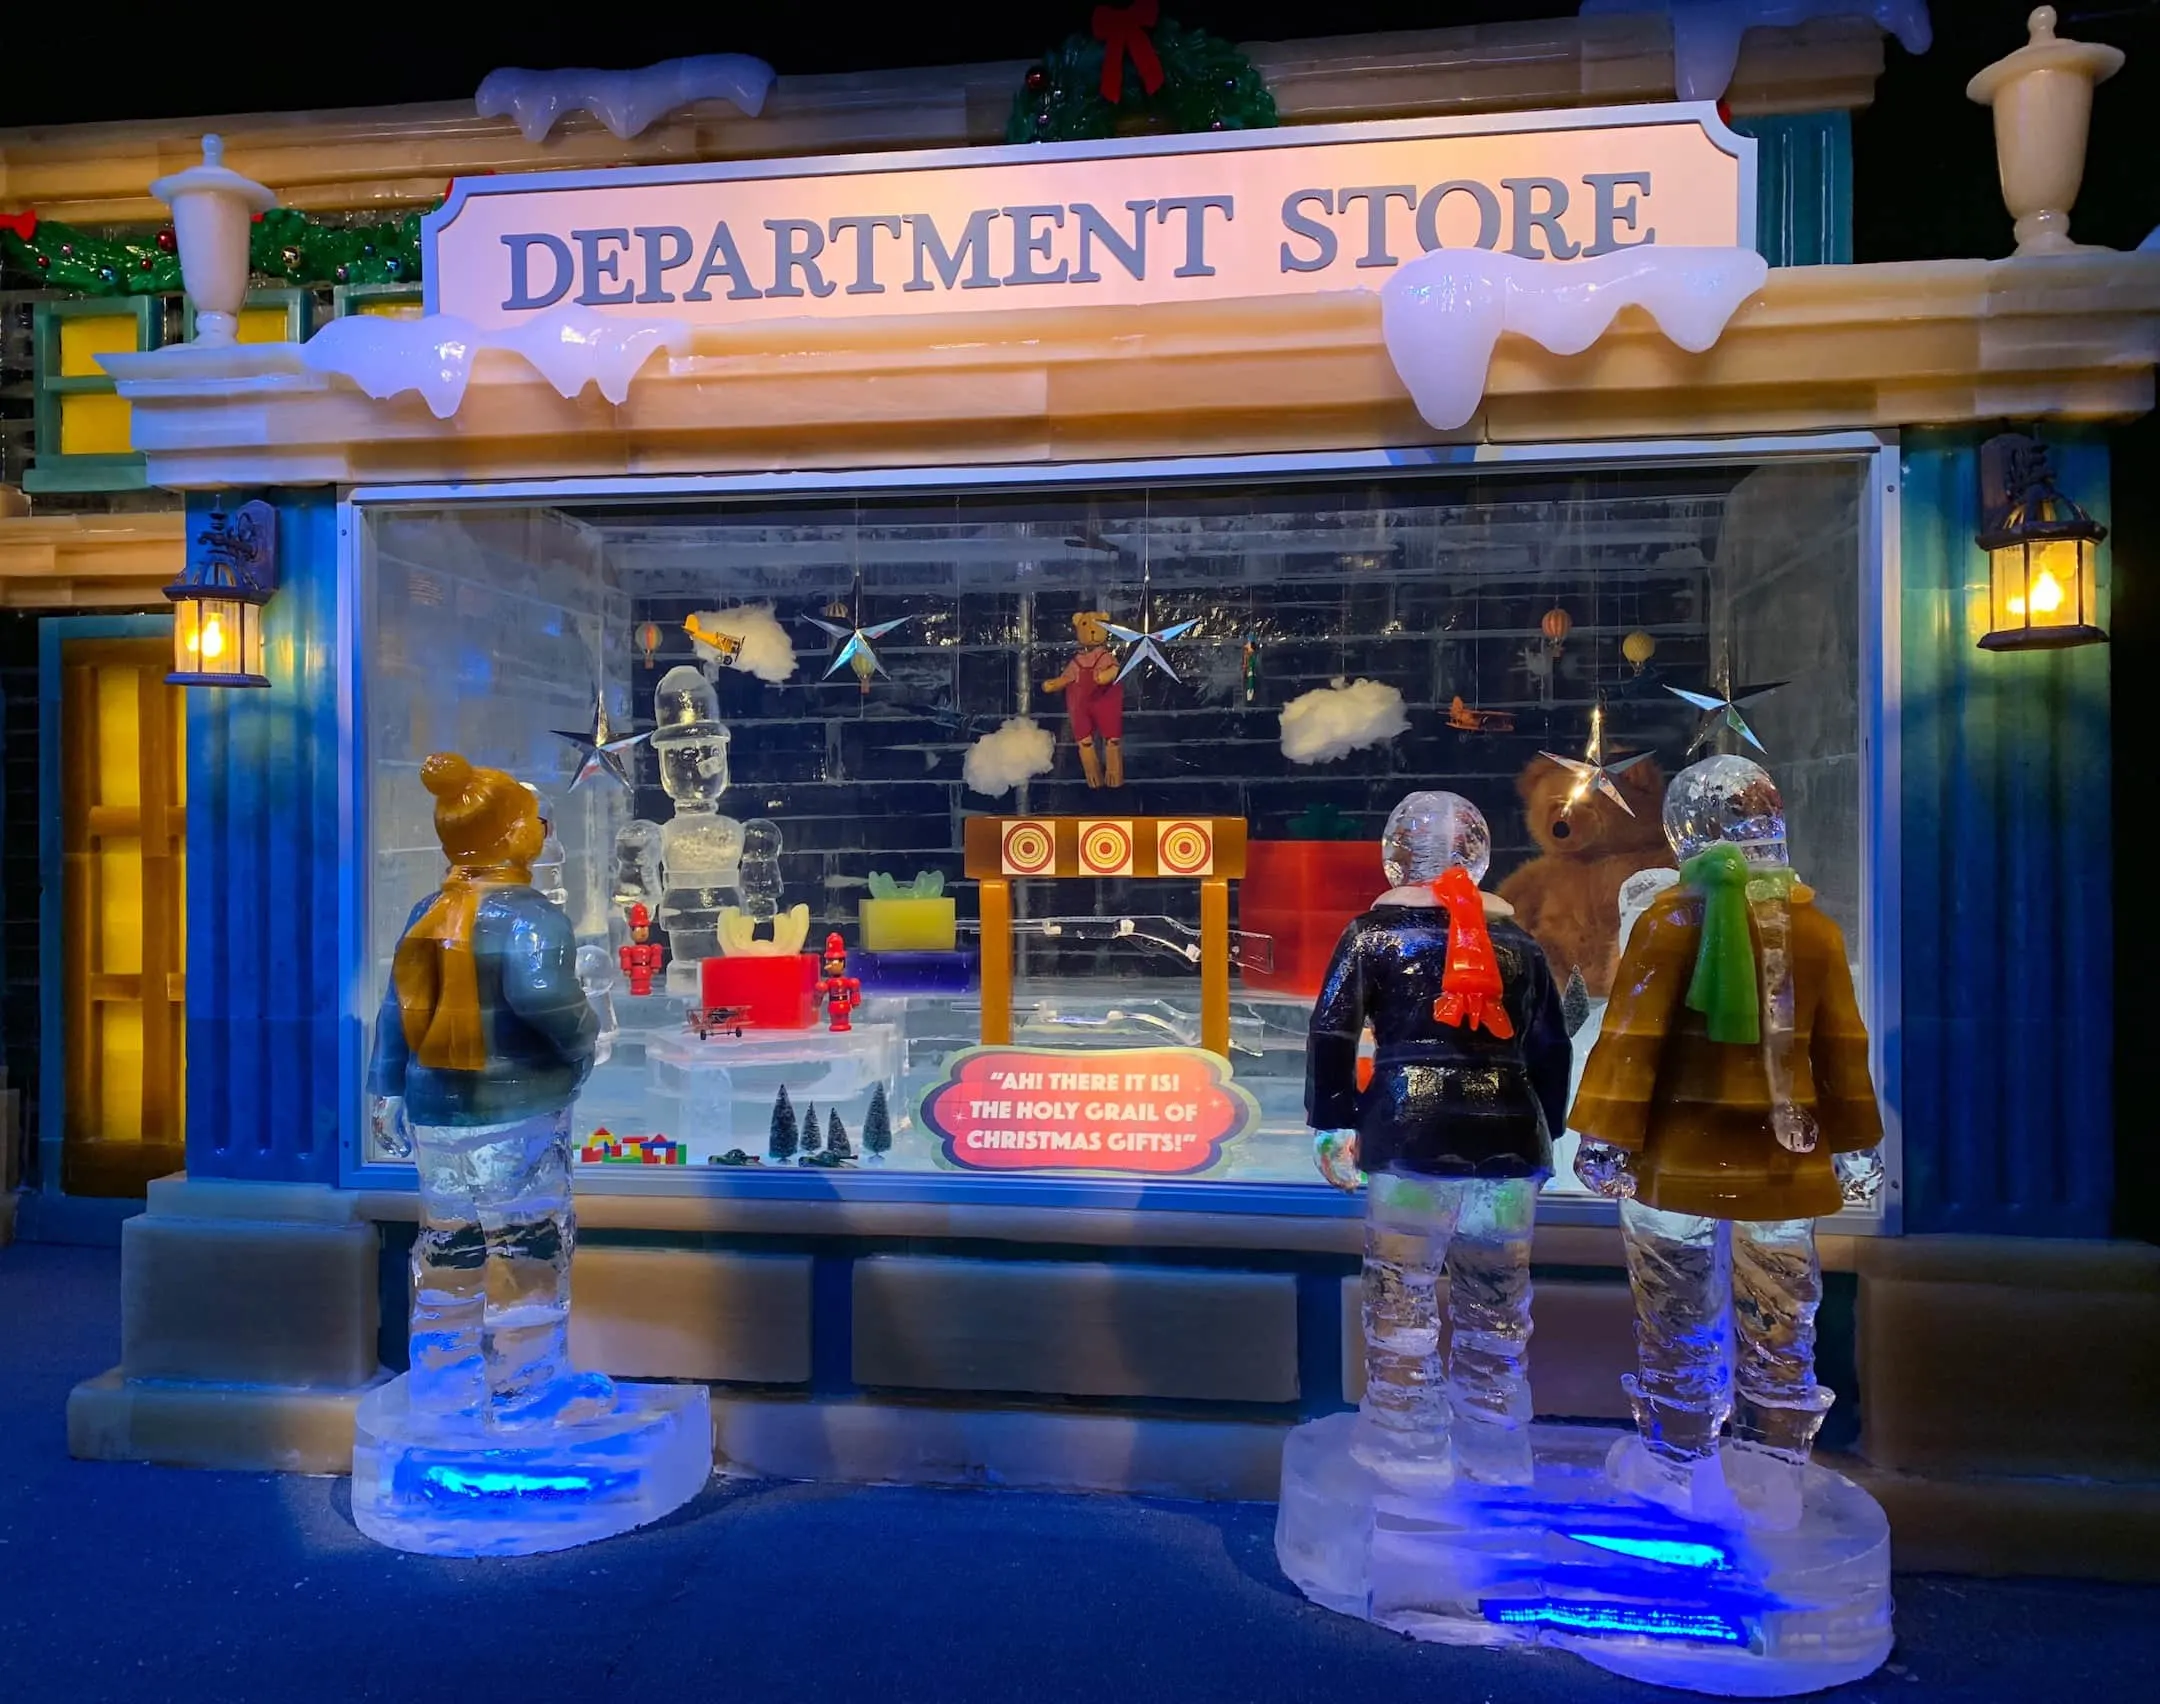 Gaylord Palms ICE 2018 A Christmas Story Orlando Department Store